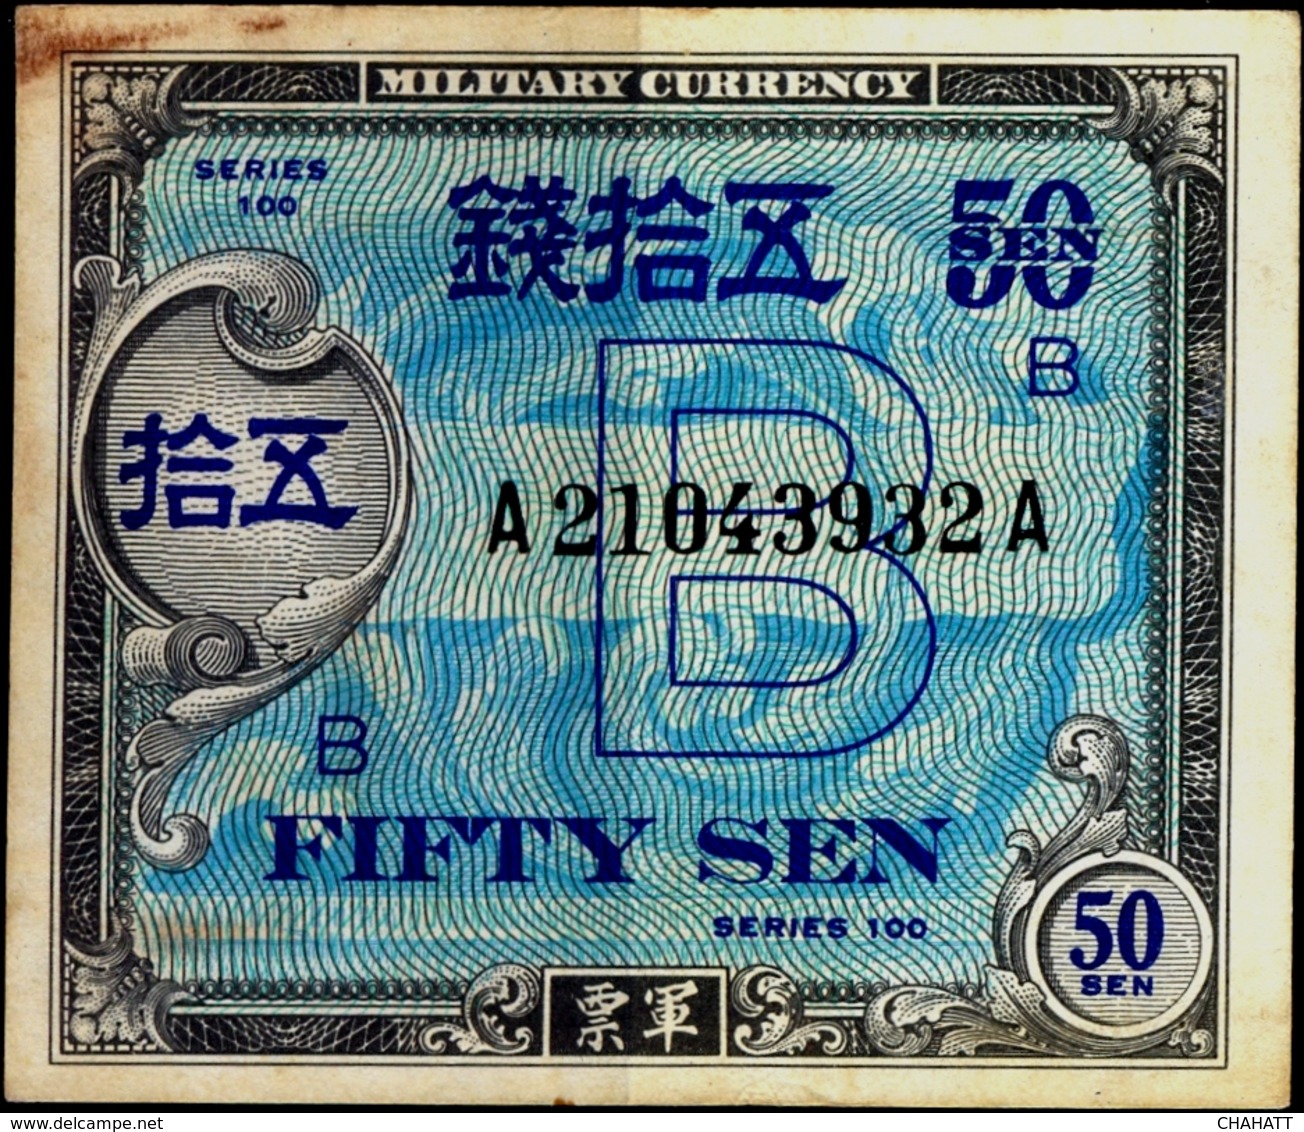 MILITARY CURRENCY-50 SEN- JAPAN-SERIES100-H-609 - Giappone